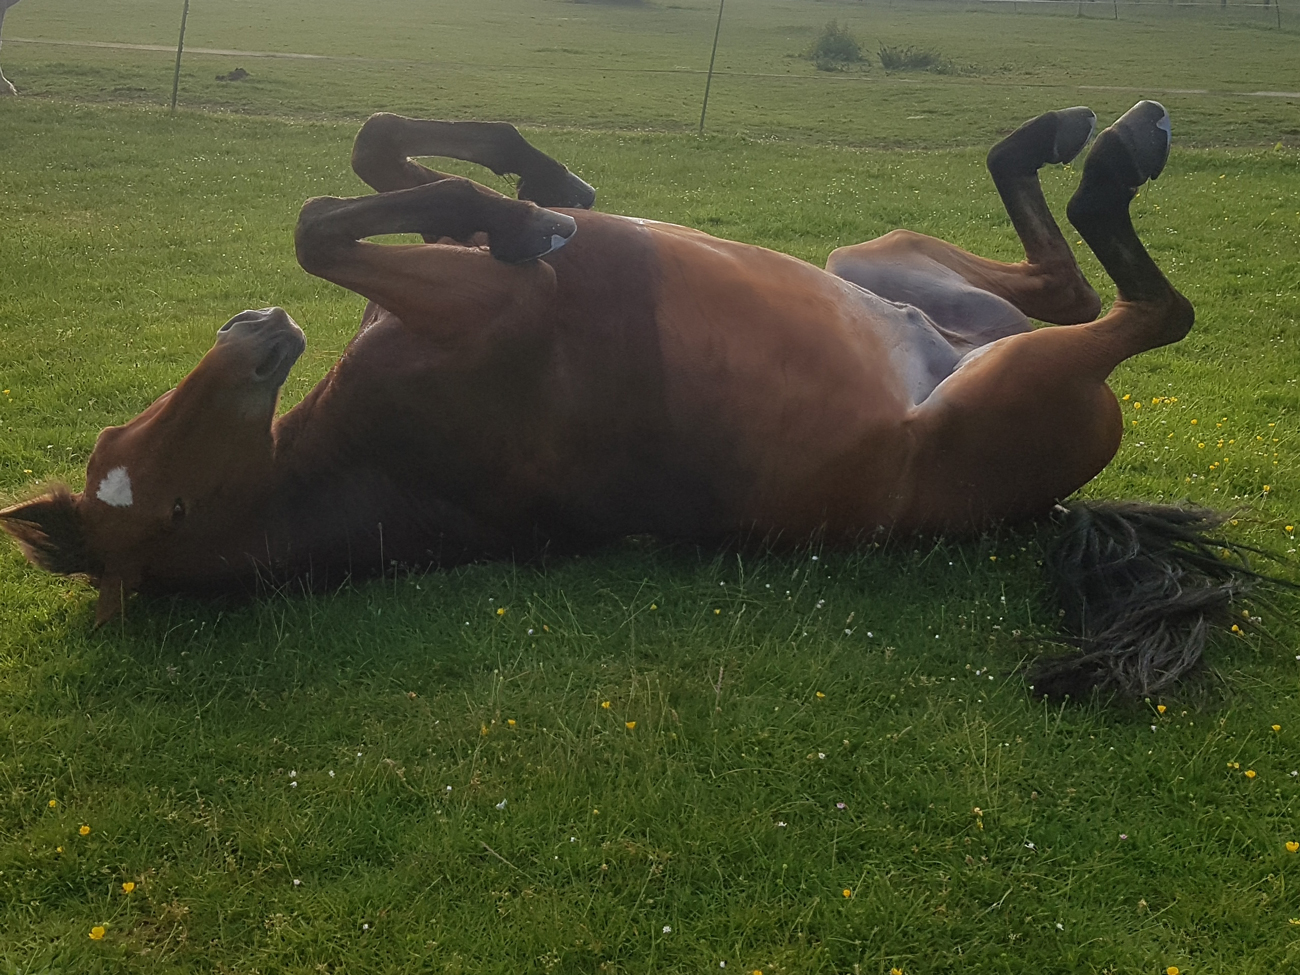 A horse rolling around on its back in a grassy field